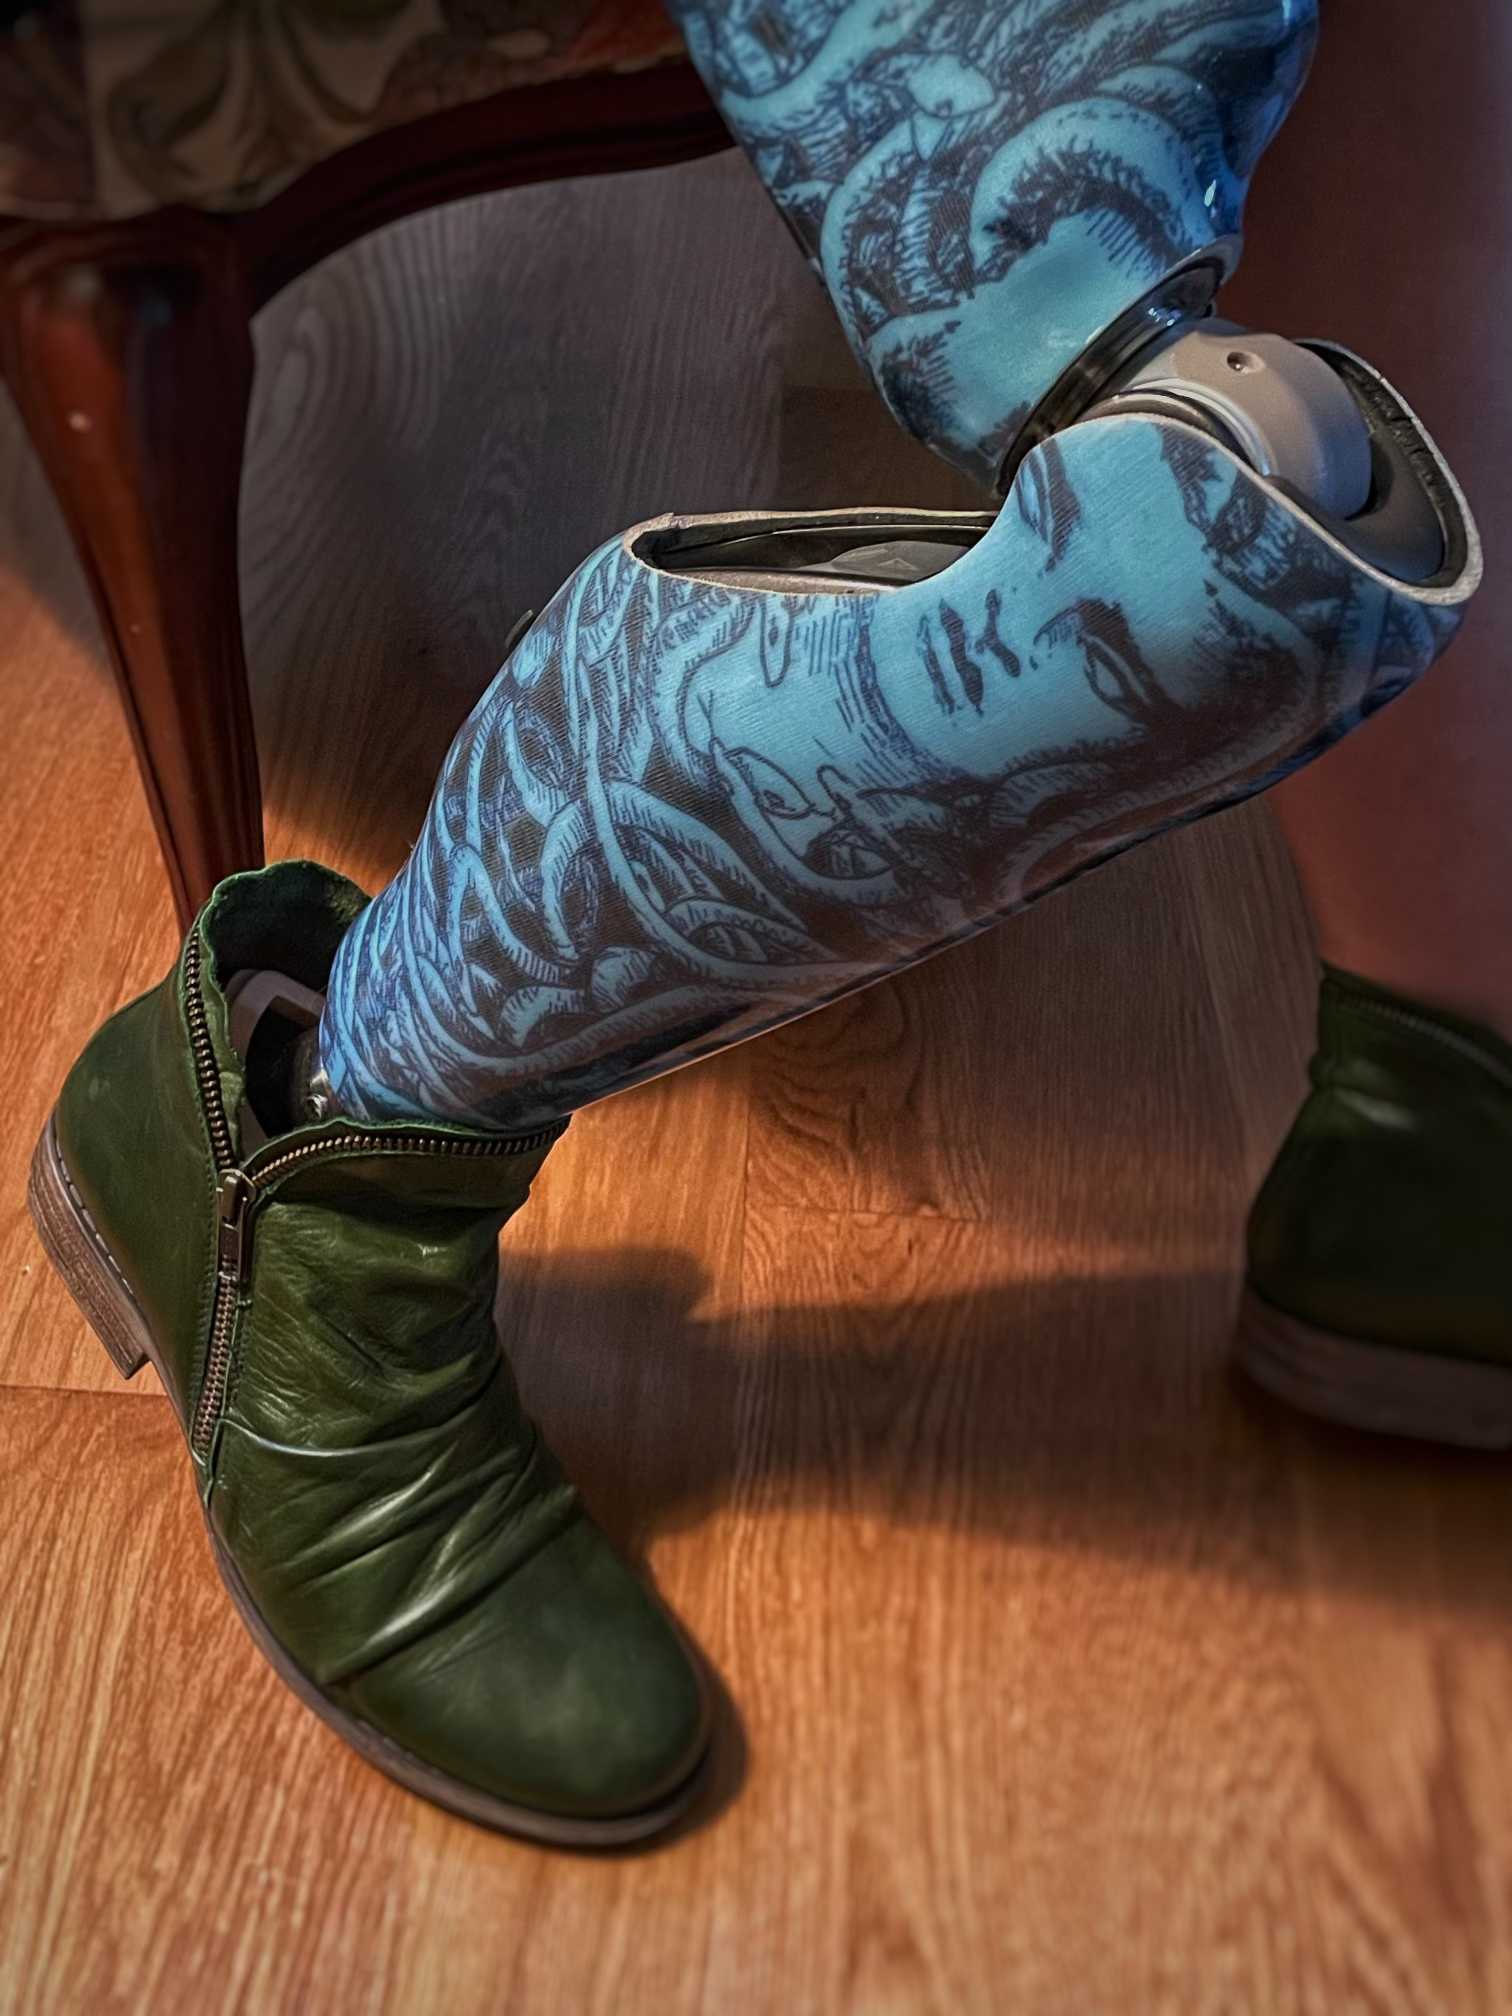 How Jennifer Transformed Her Prosthetic Leg into a Creative Expression 